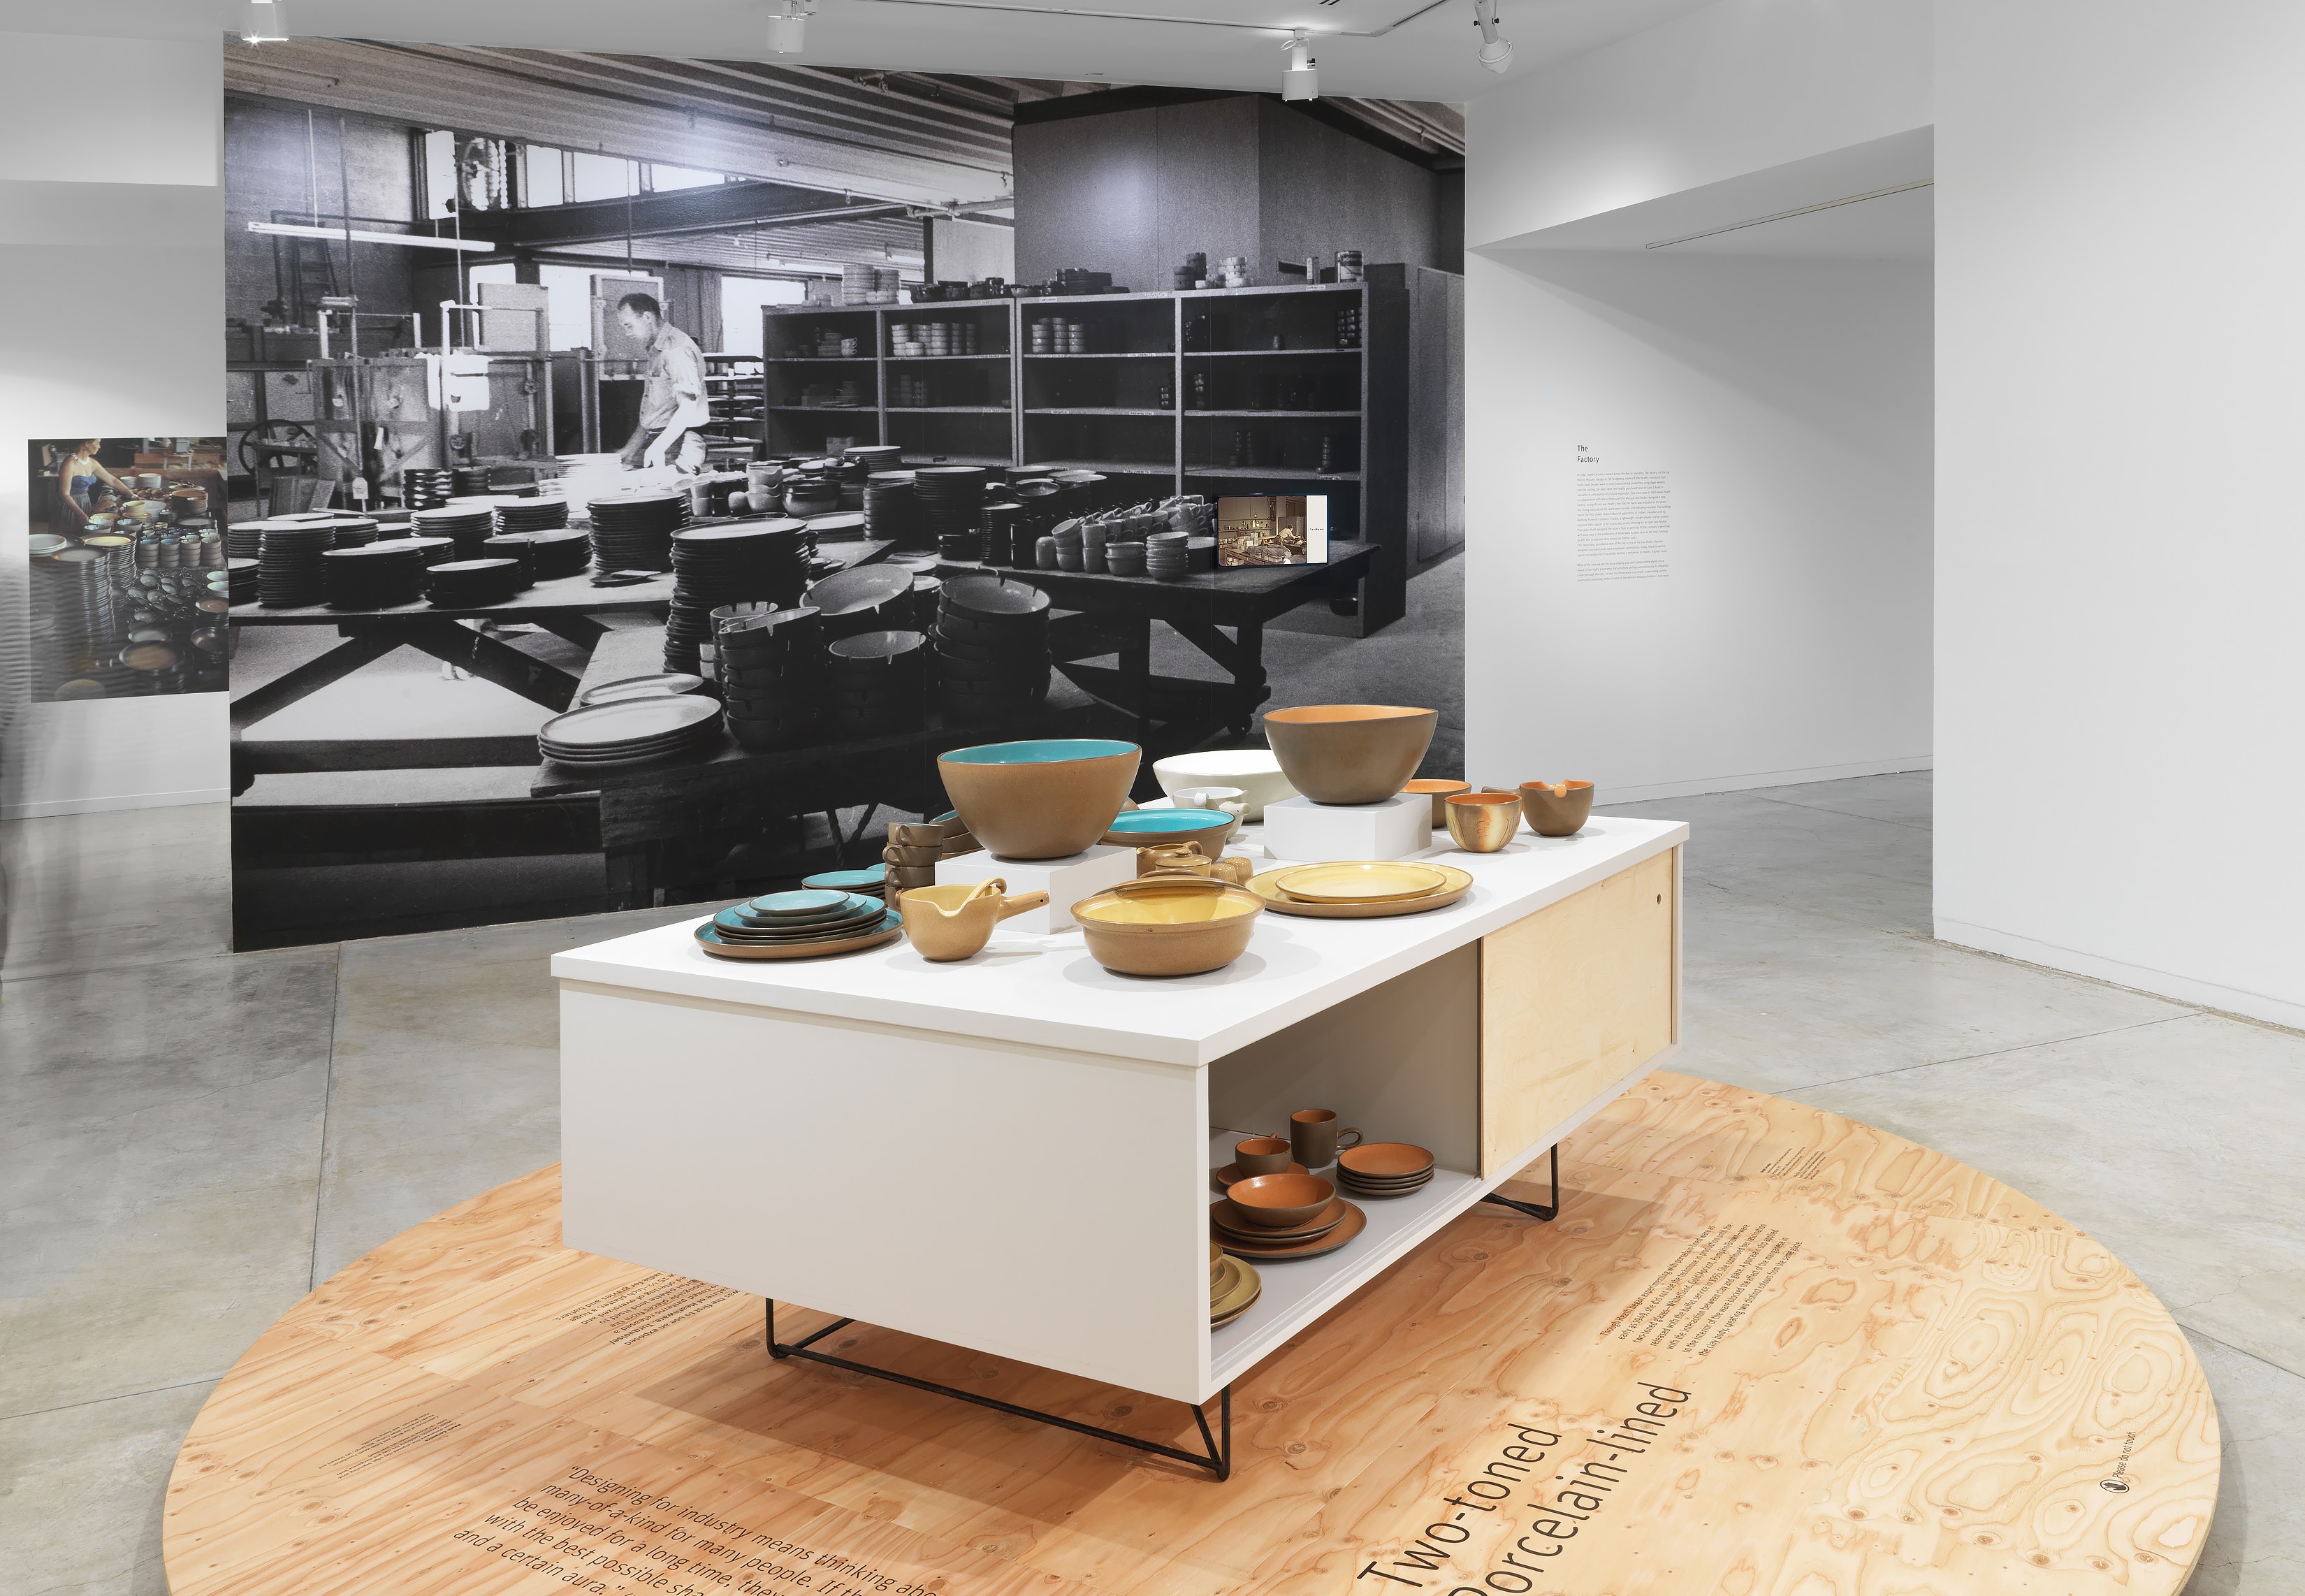 Photograph with two-toned dinnerware in the foreground and a picture of the Heath Ceramics Factory on the wall behind.